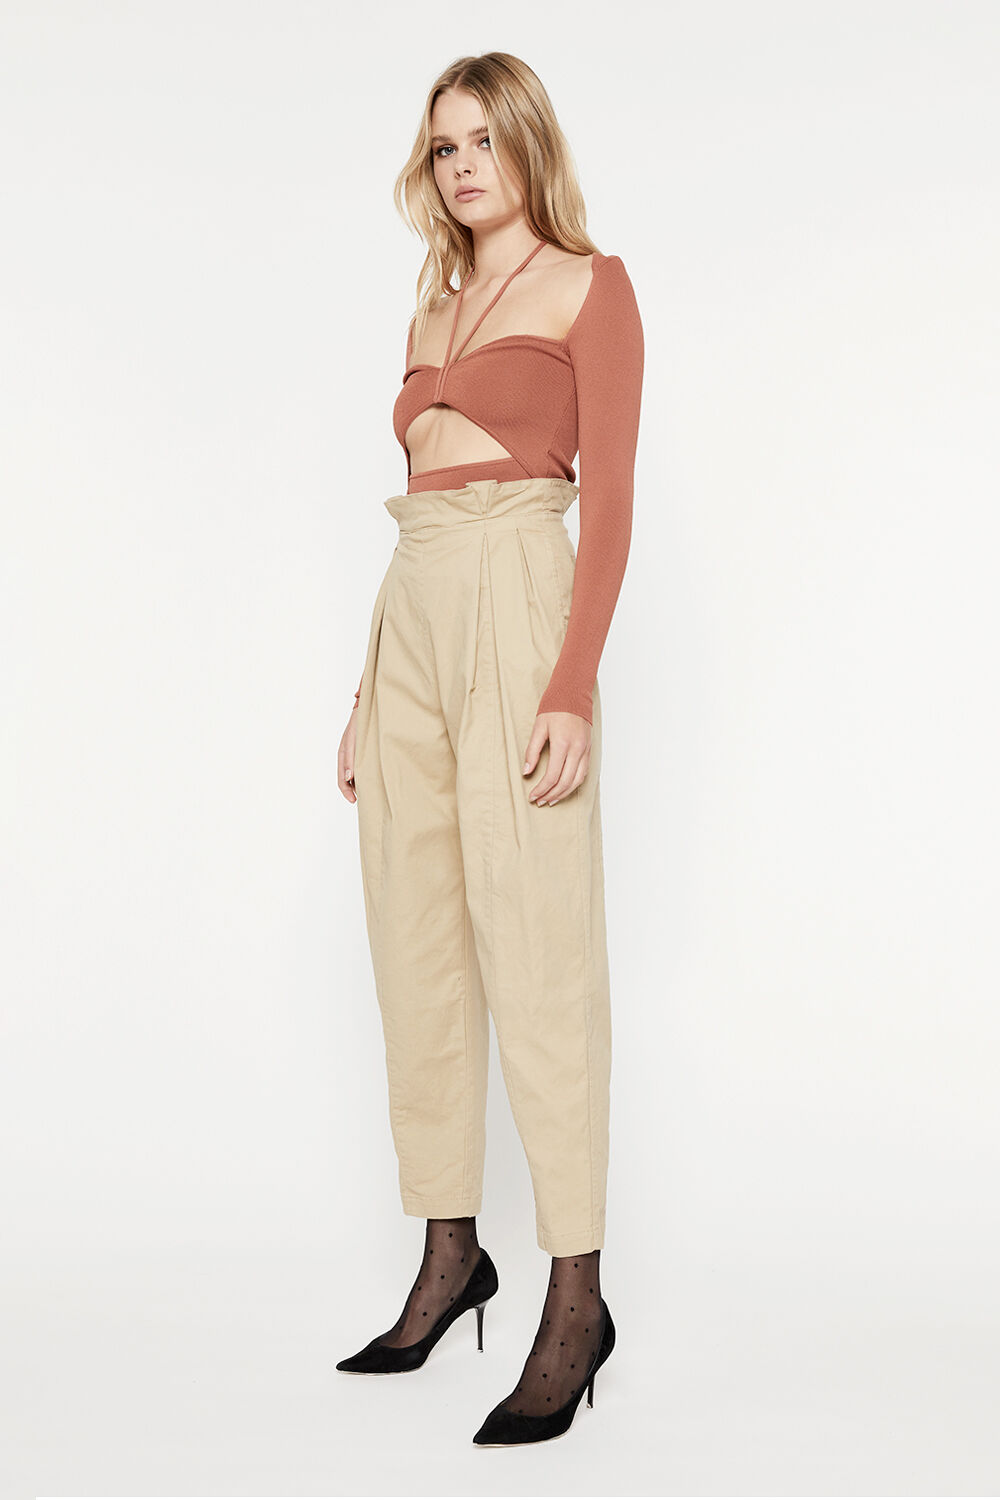 MAXWELL KNIT TOP in colour MOCHA BISQUE